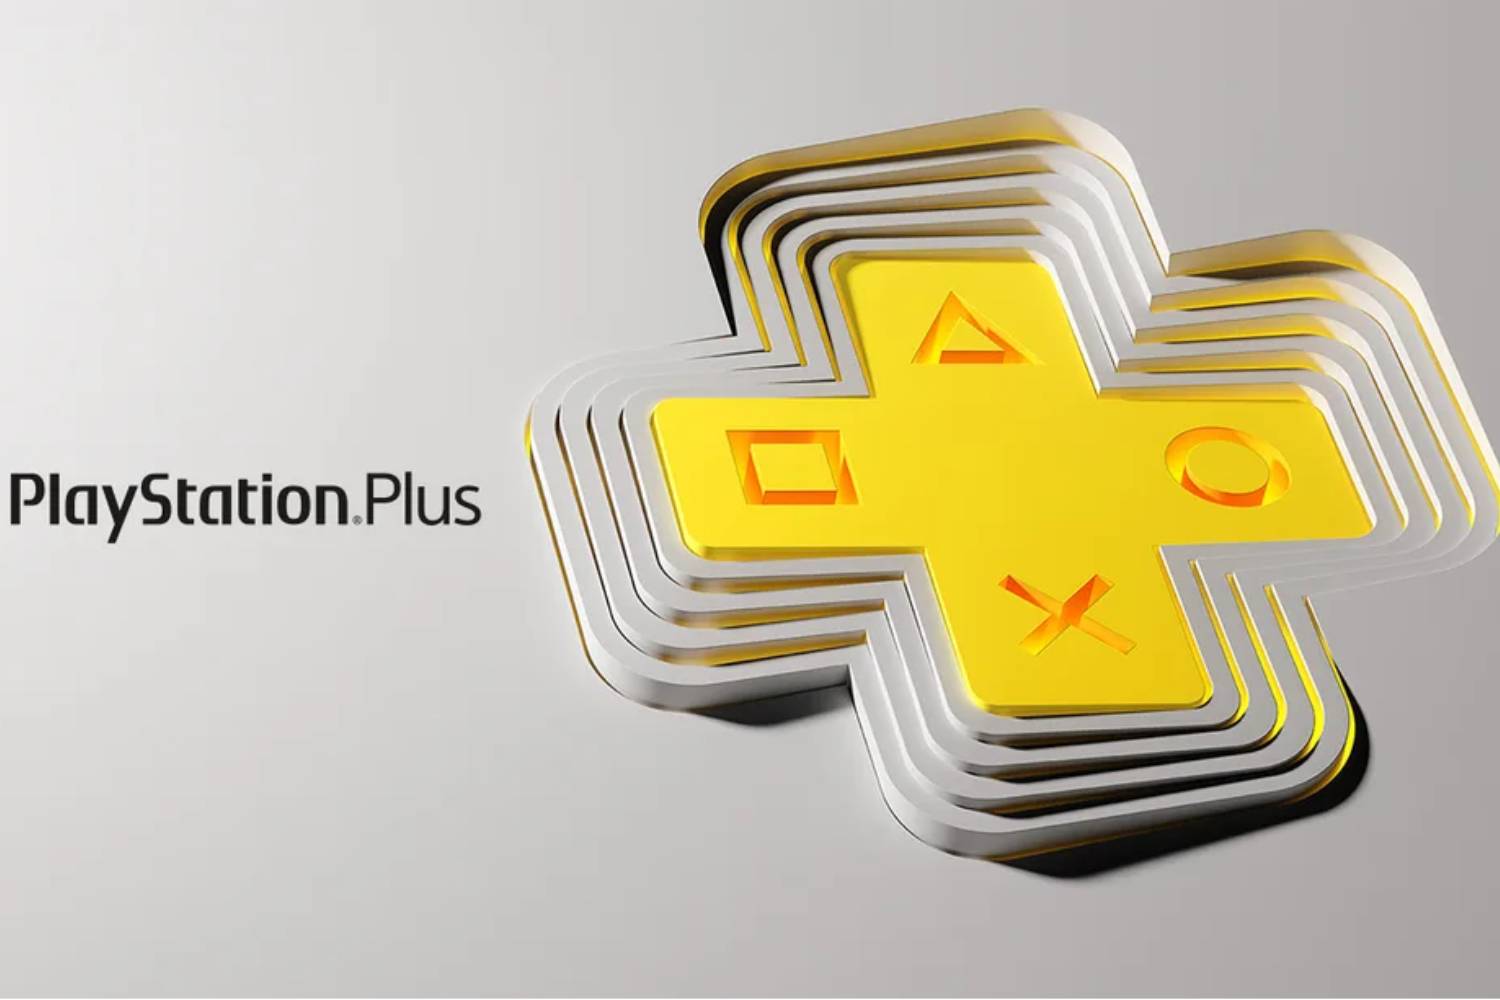 PlayStation Plus: everything need to know about Sony's subscription service | Stuff